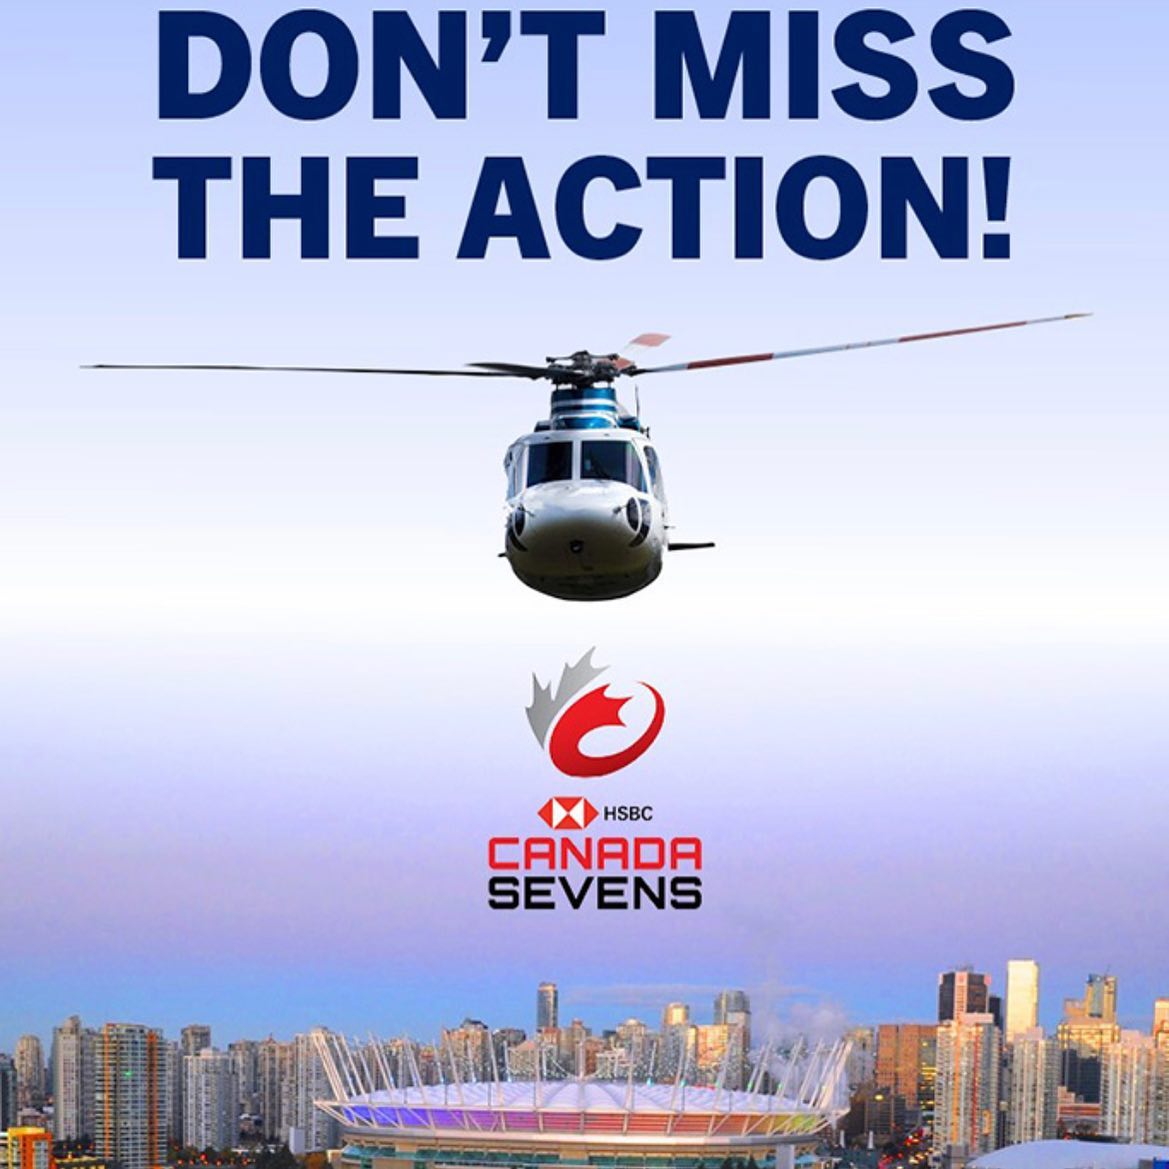 #Helijet is excited to join the fans and players at @BCPlace this weekend, as an Official Partner of @canadasevens! 

#c7s #canada7s #wefancy #canadasevens #hsbccanadasevens #rugby #worldrugby #sevens